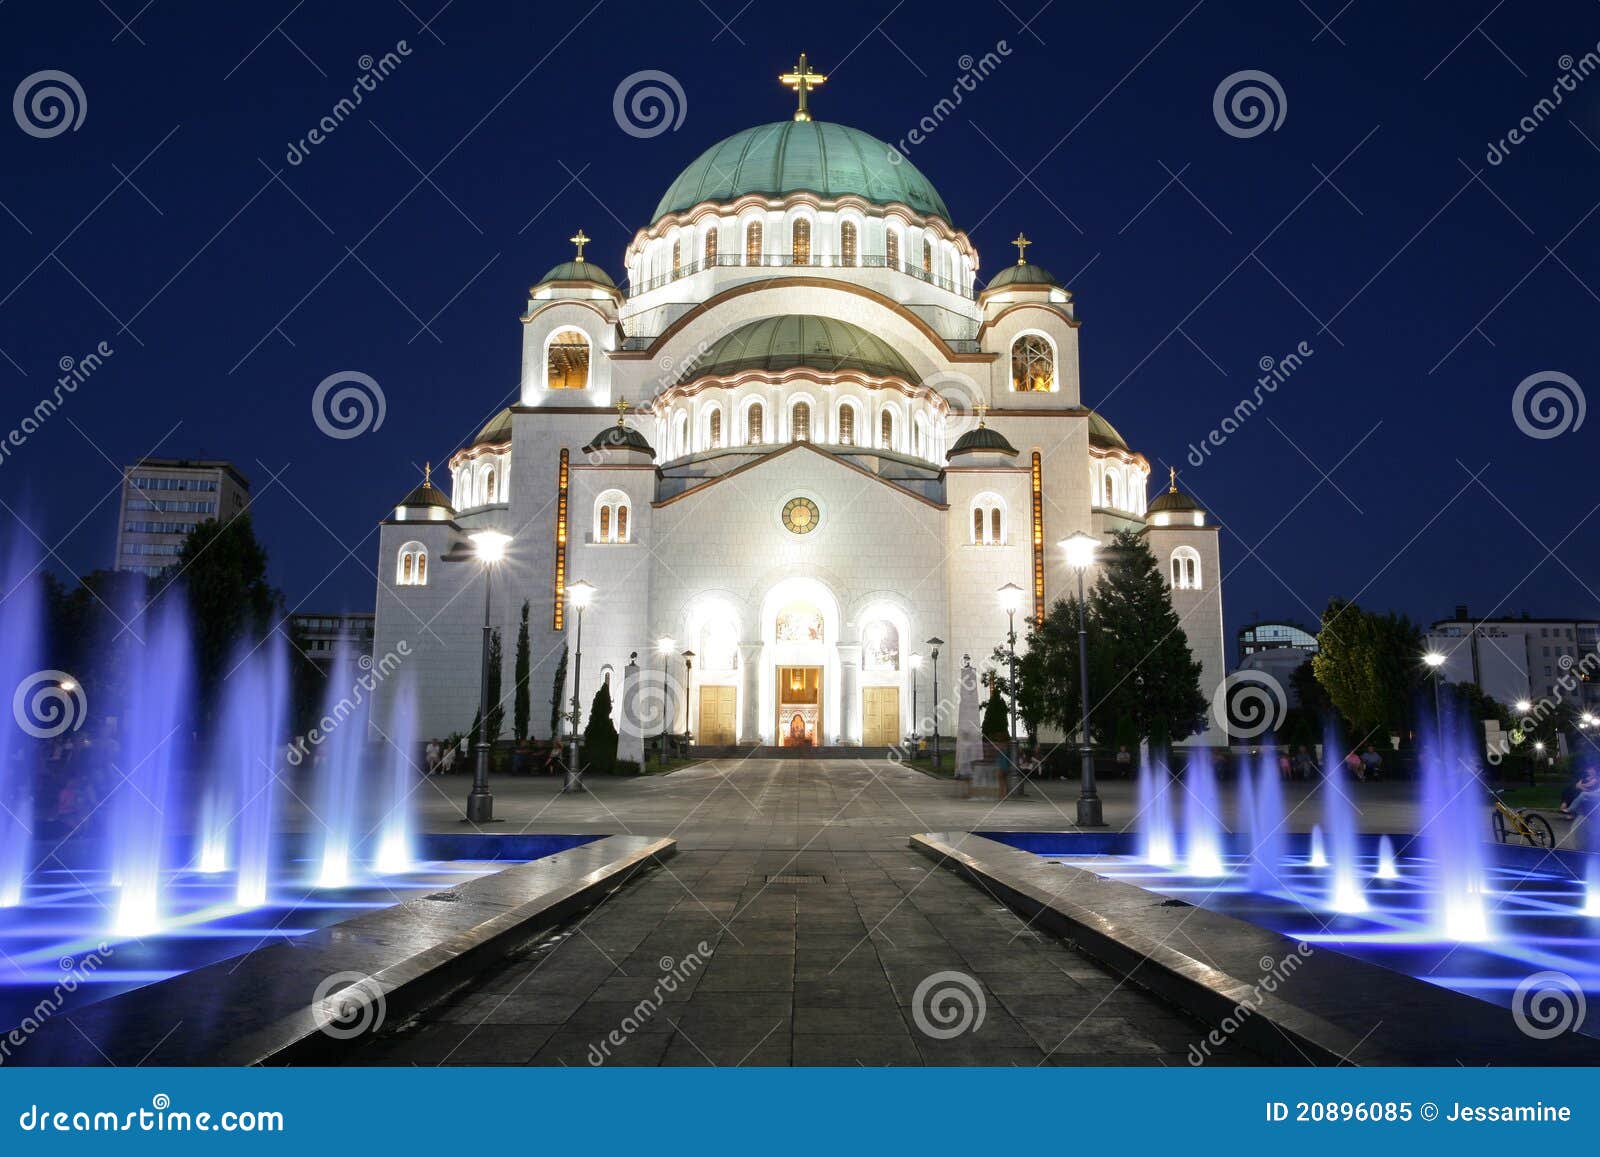 cathedral of saint sava by night